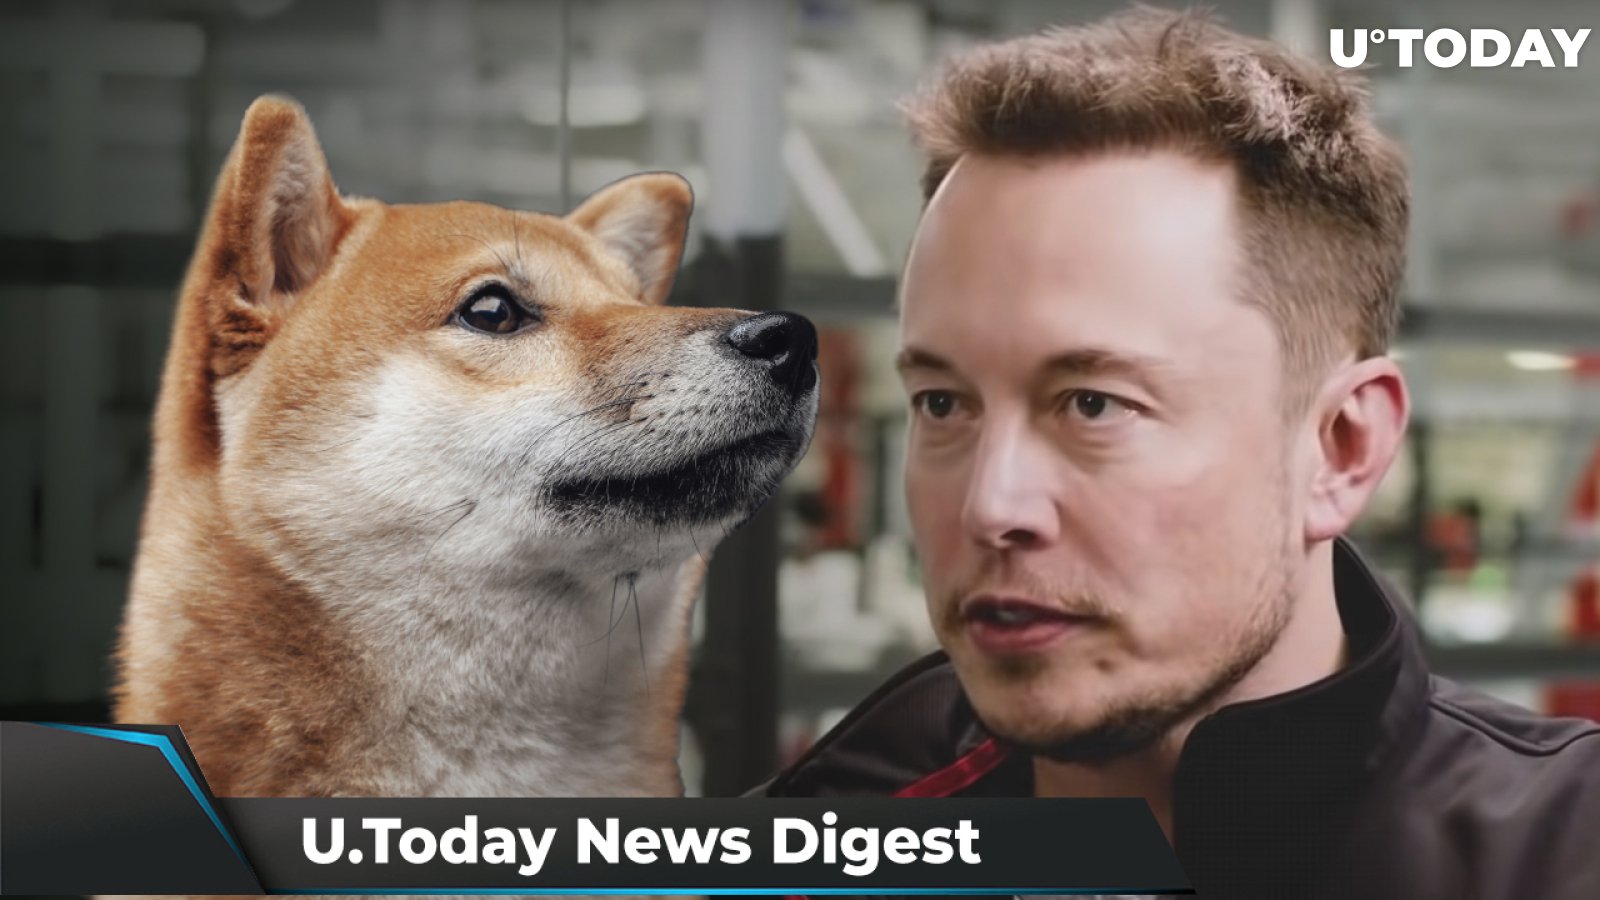 SHIB to Be Listed on CoinDCX Go App, Crypto Is Now Banned for Muslims, Musk-Inspired Coin Surges 20x, Then Loses 95%: Crypto News Digest by U.Today